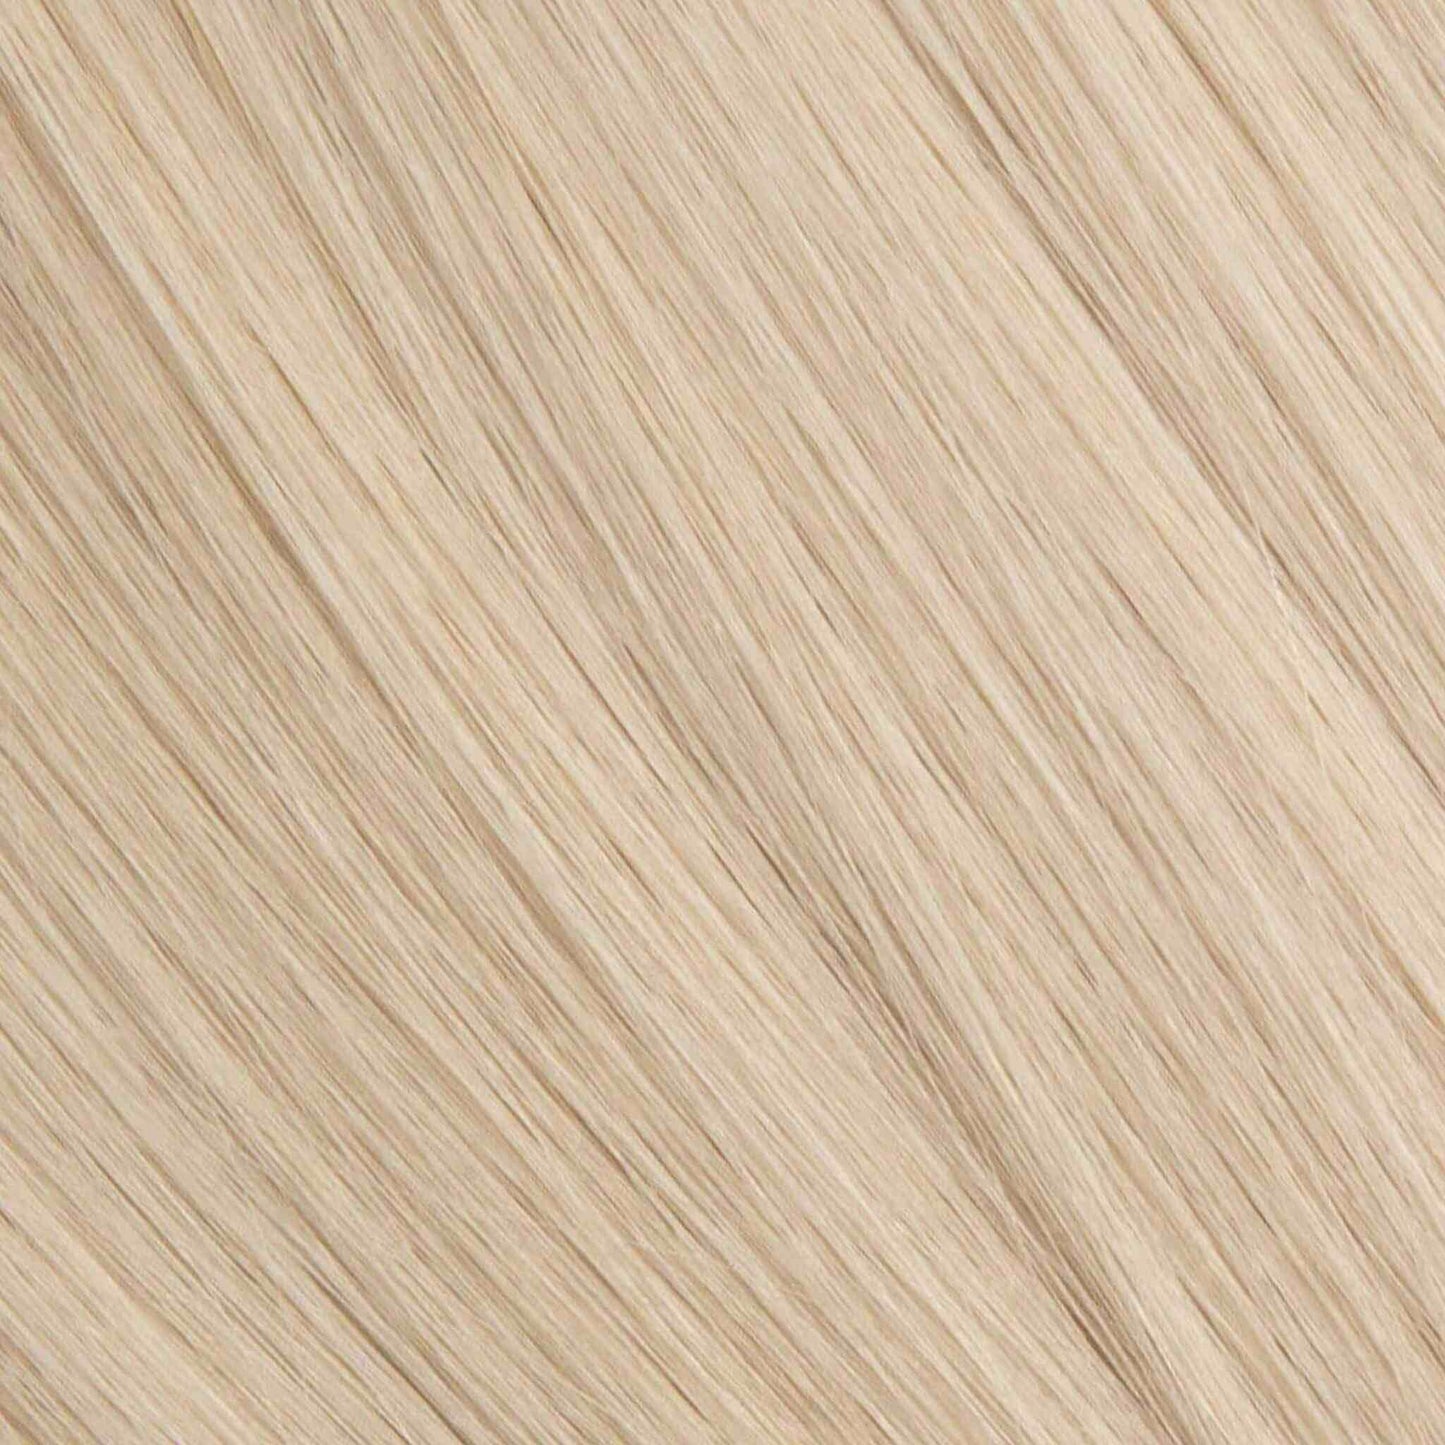 K-Tip 16" 25g Professional Hair Extensions - Icy Silver Blonde #66